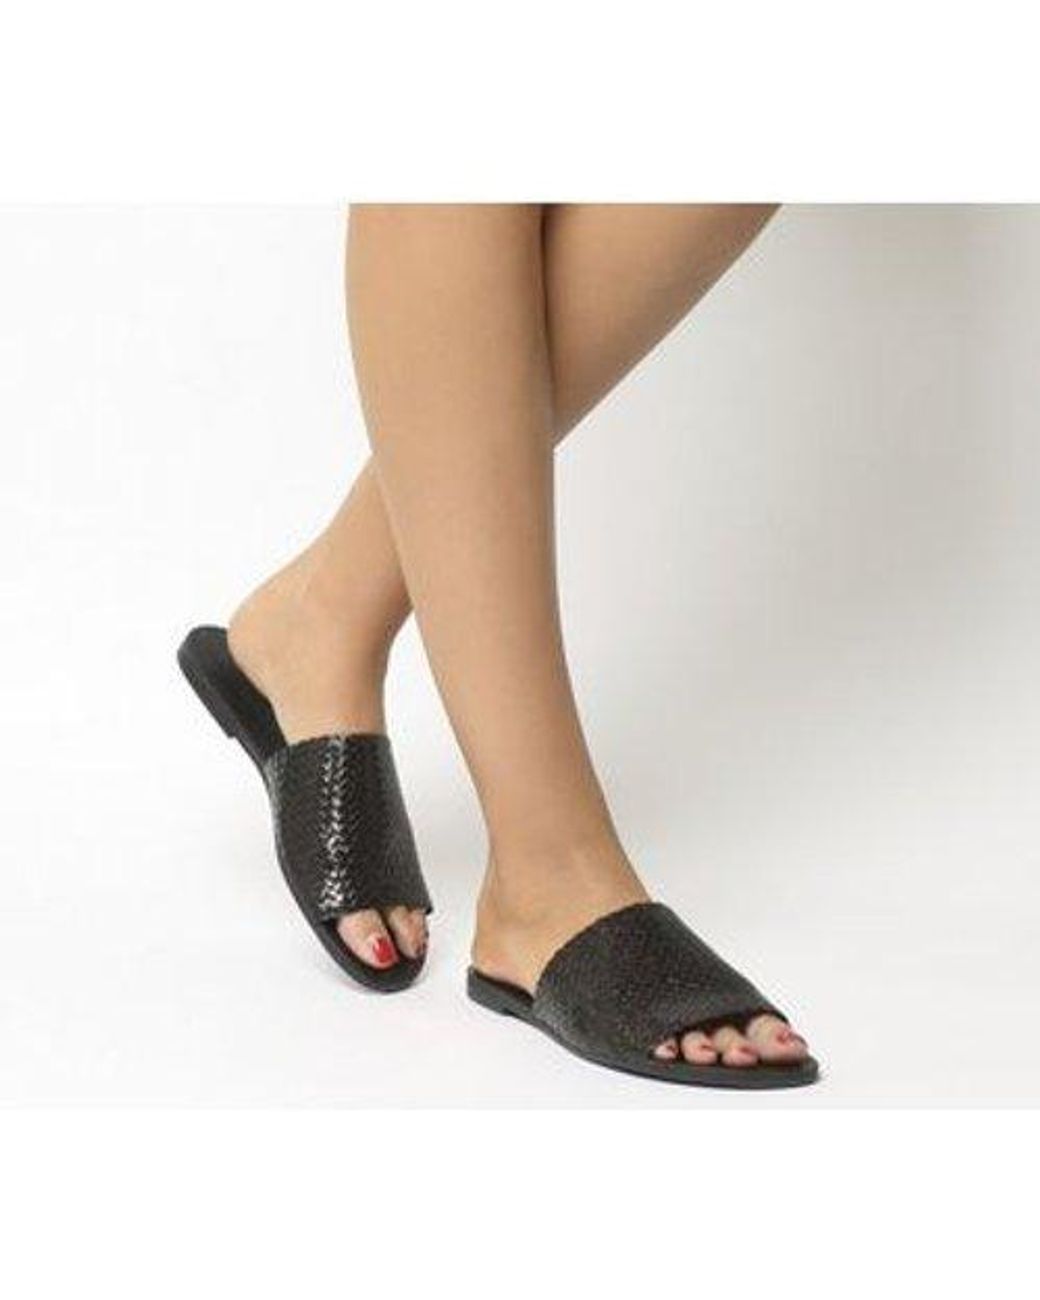 Vagabond Leather Shoemakers Tia Woven Sandals in Black - Lyst